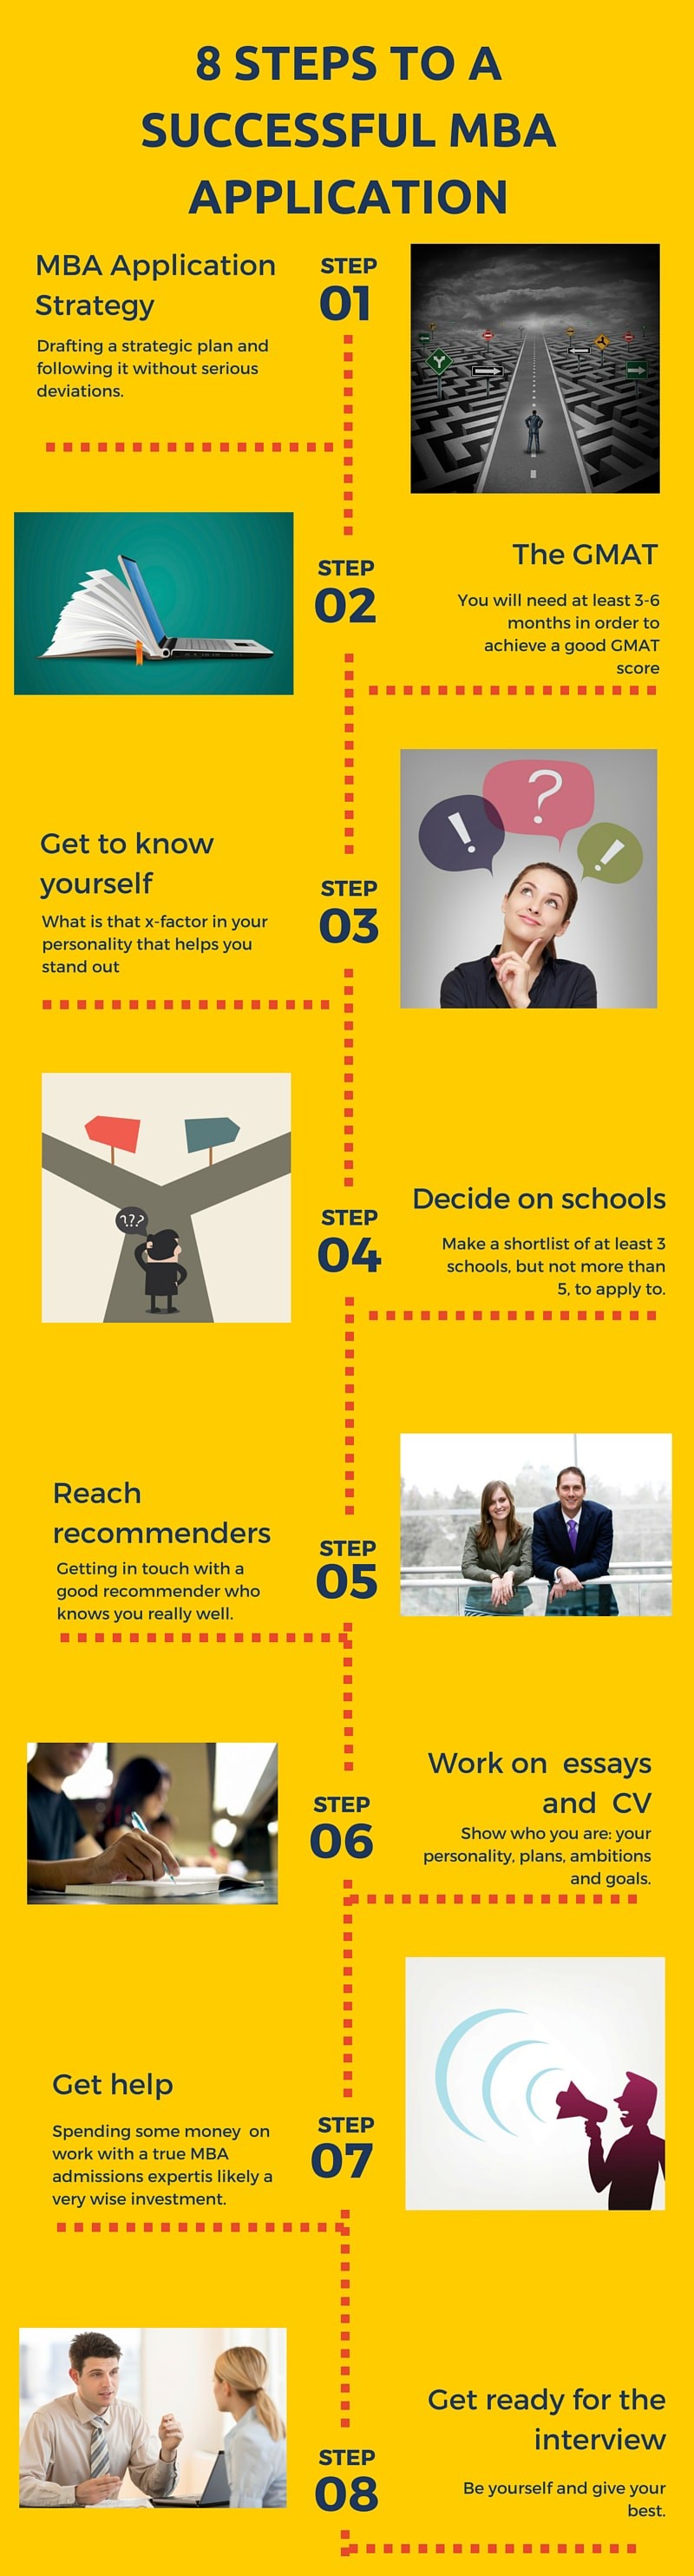 8 Steps for a Successful MBA